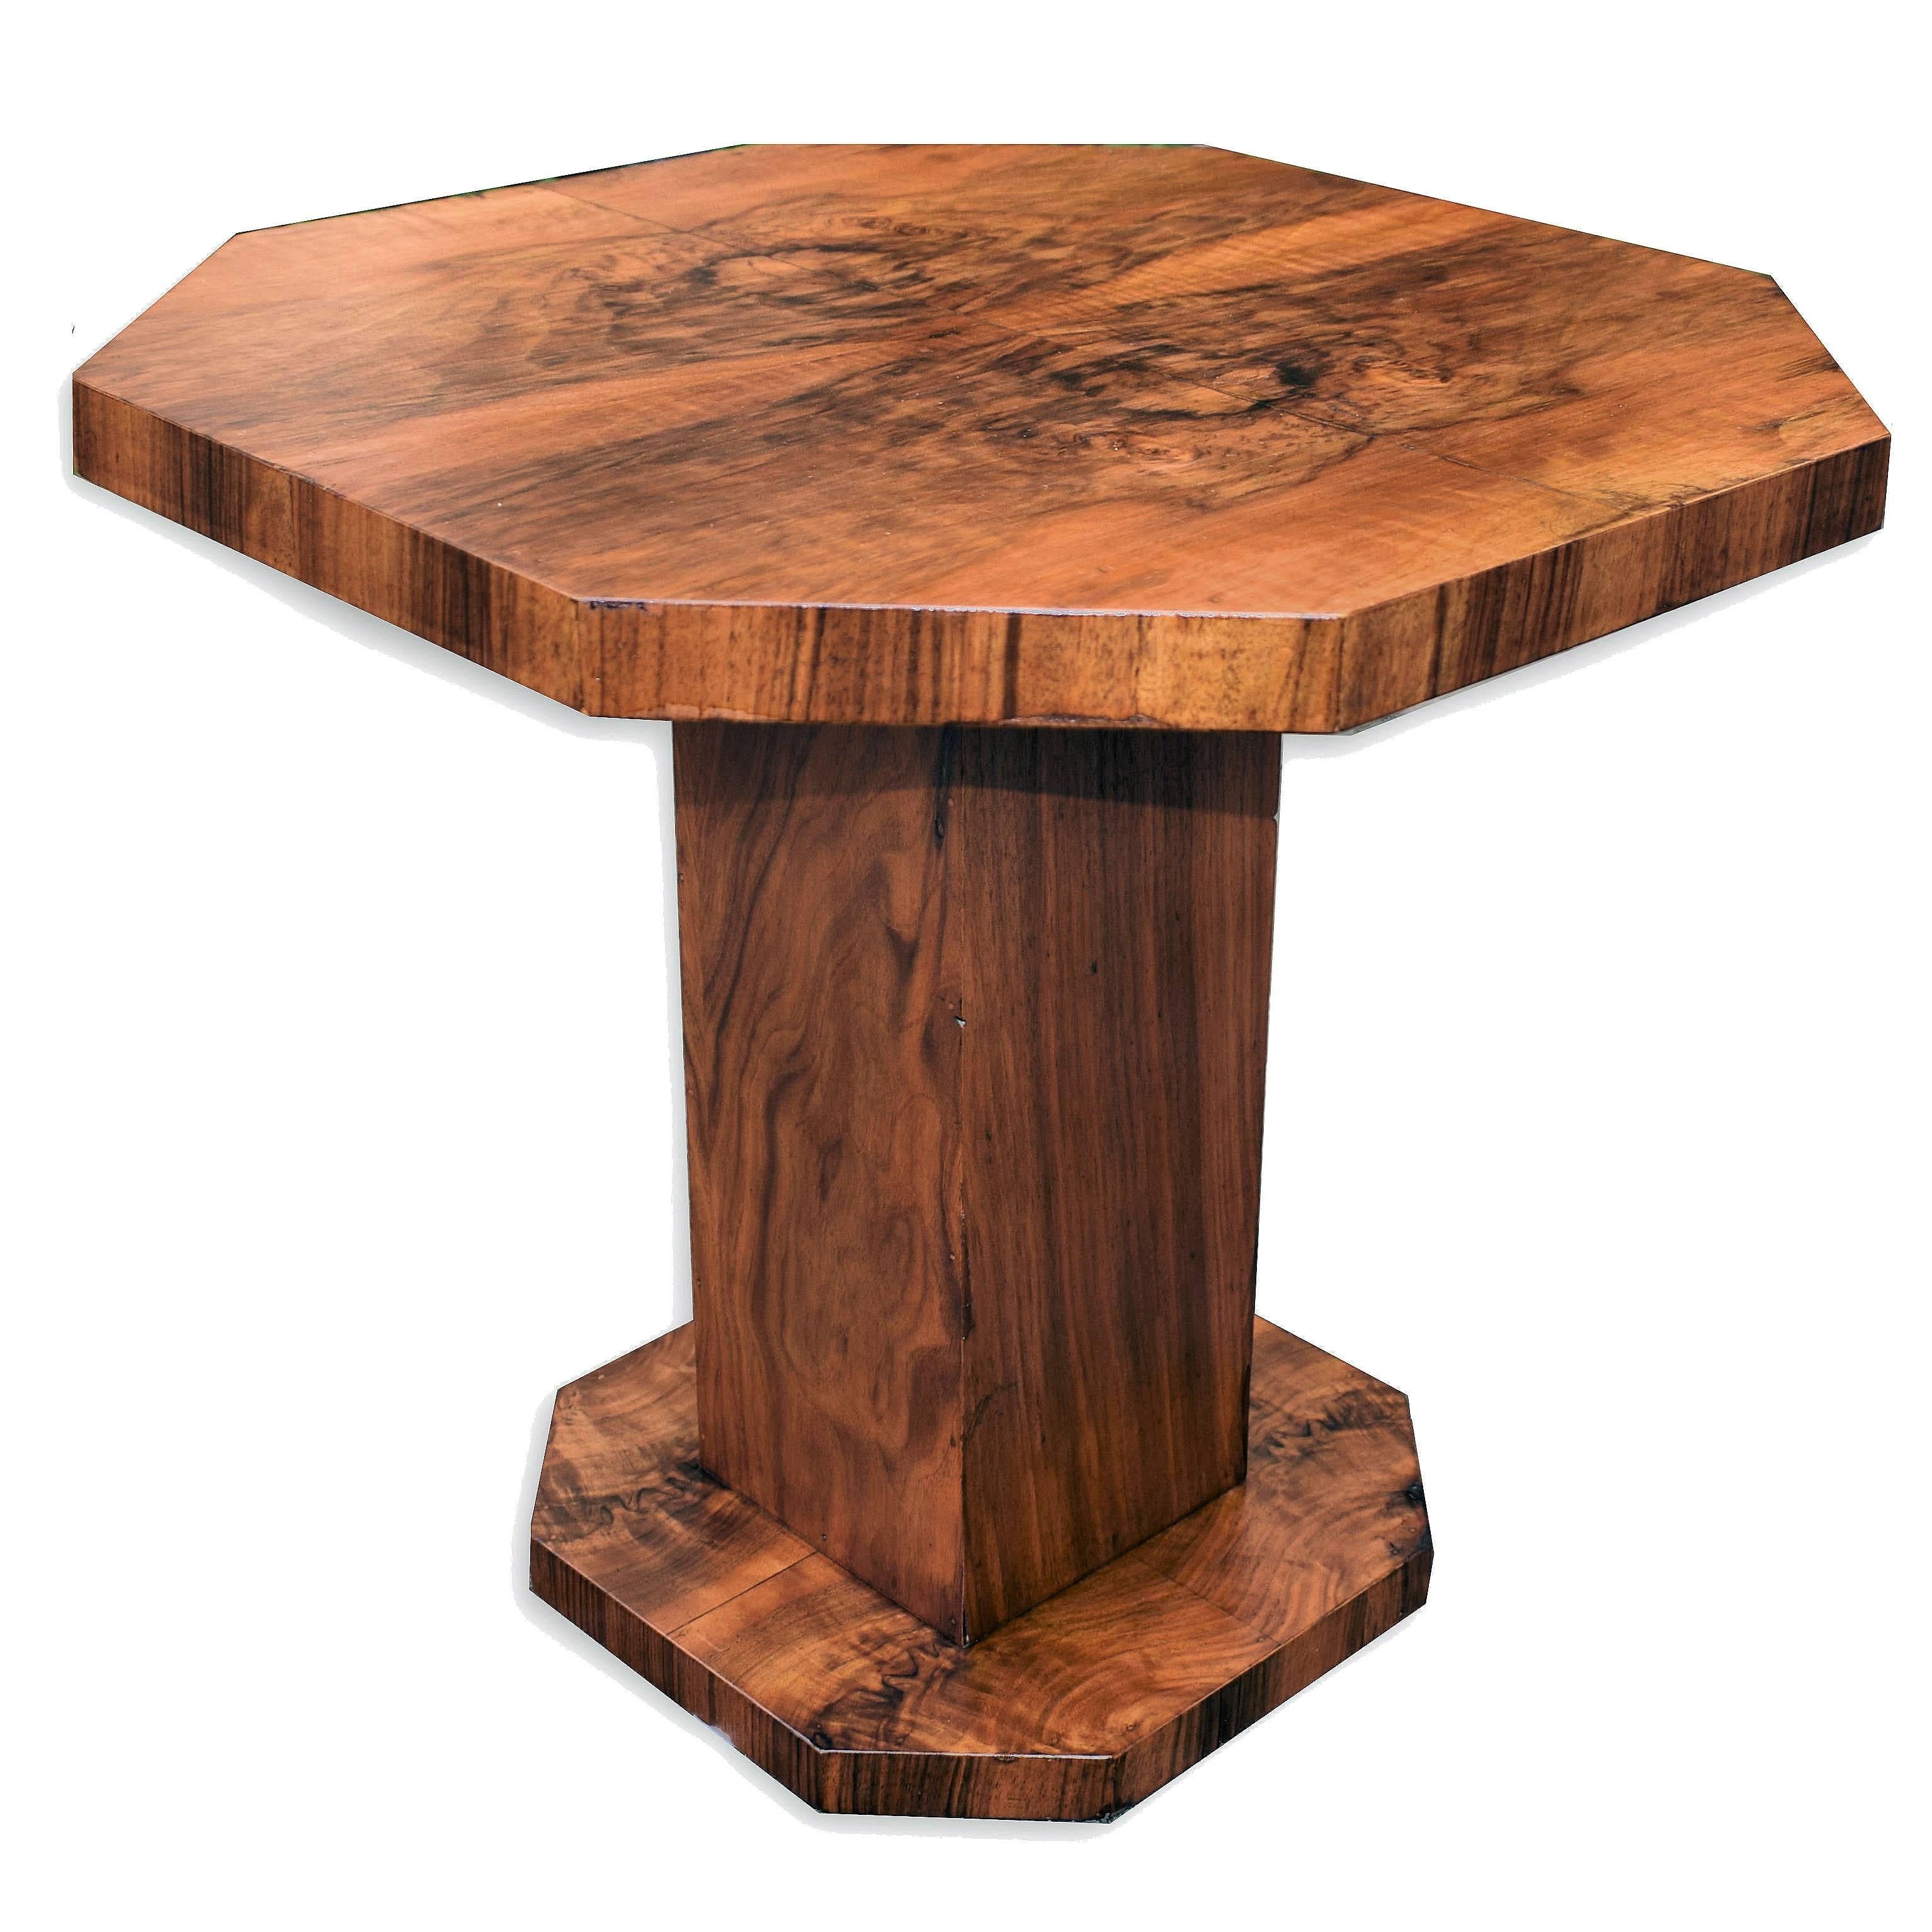 Fabulous and original 1930s Art Deco geometric occasional table. This table is ideal for modern use either as a coffee table or centre table and used as a focal point to a room. The veneers are lightly figured walnut in a mid tone colouring.